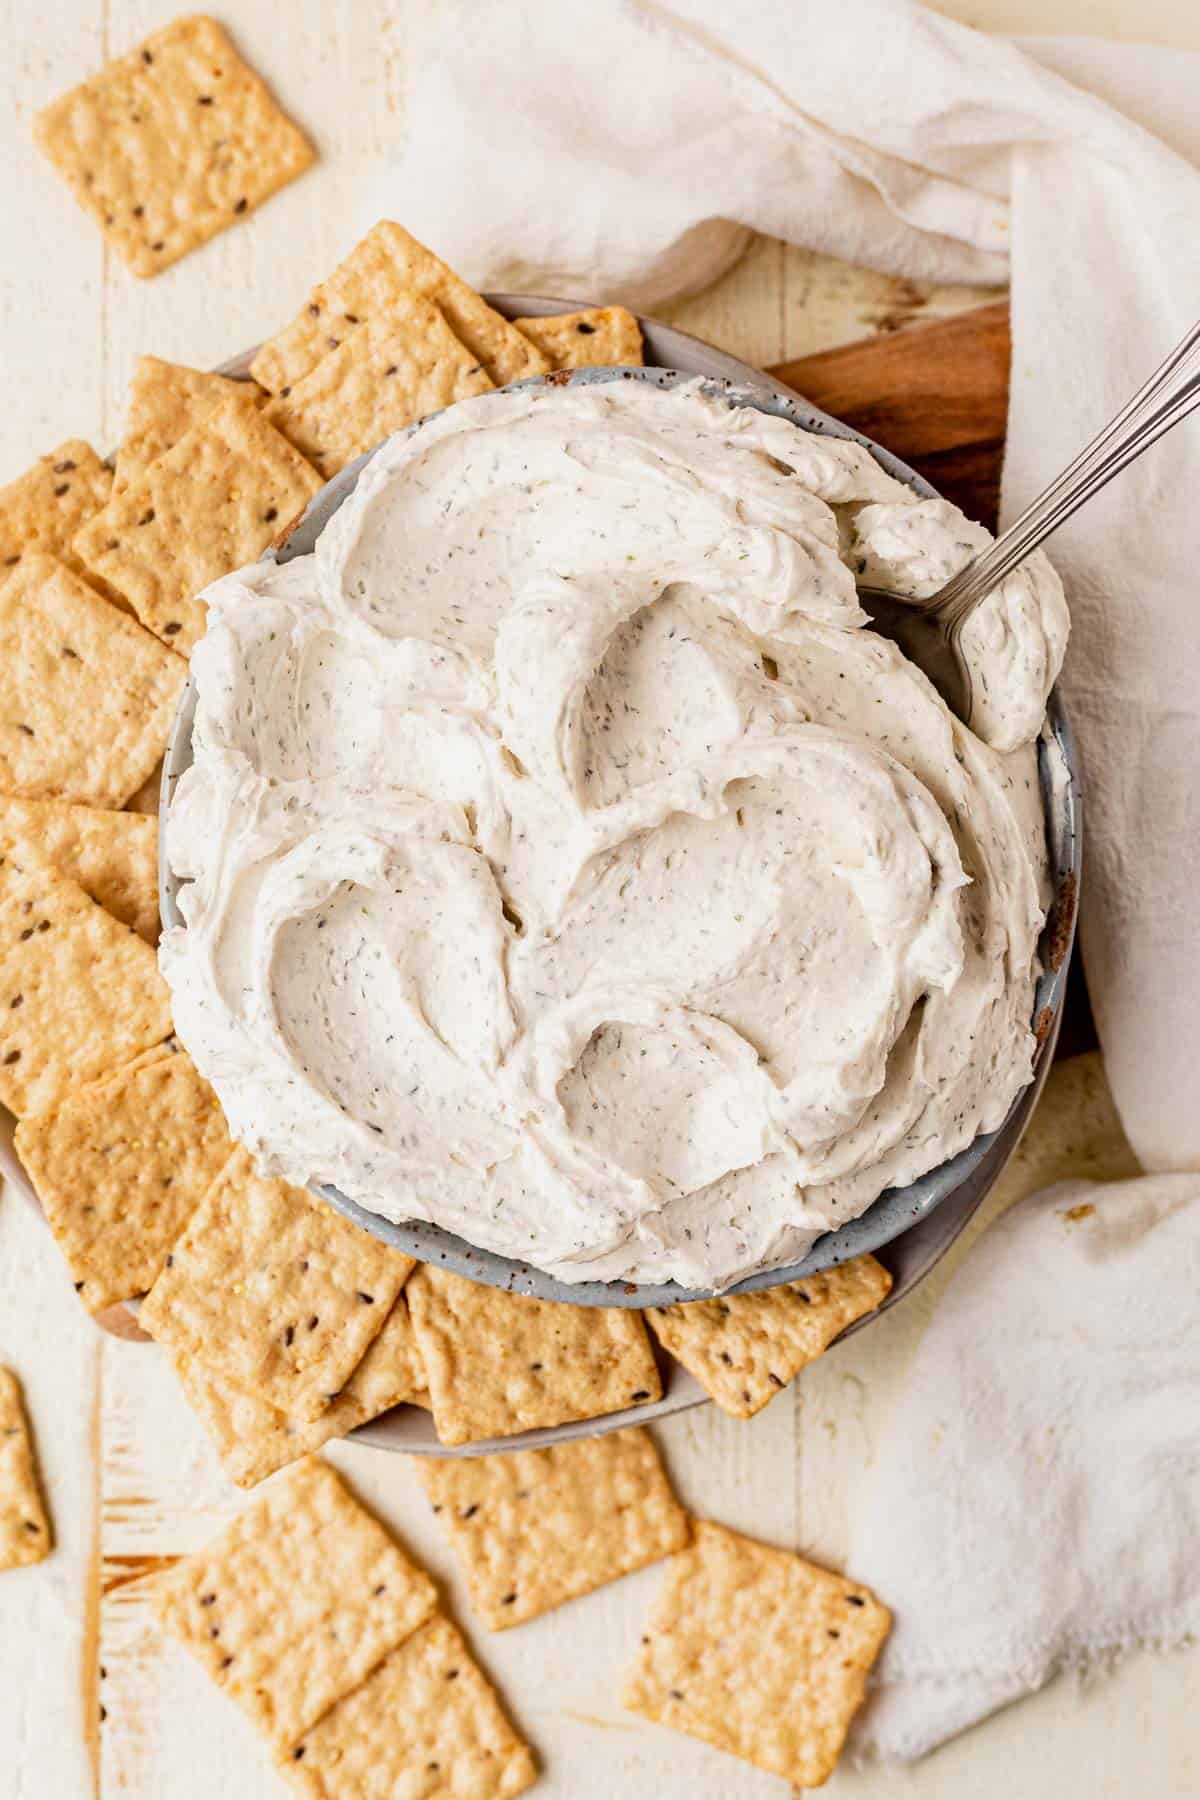 a bowl of homemade boursin cheese served with crackers